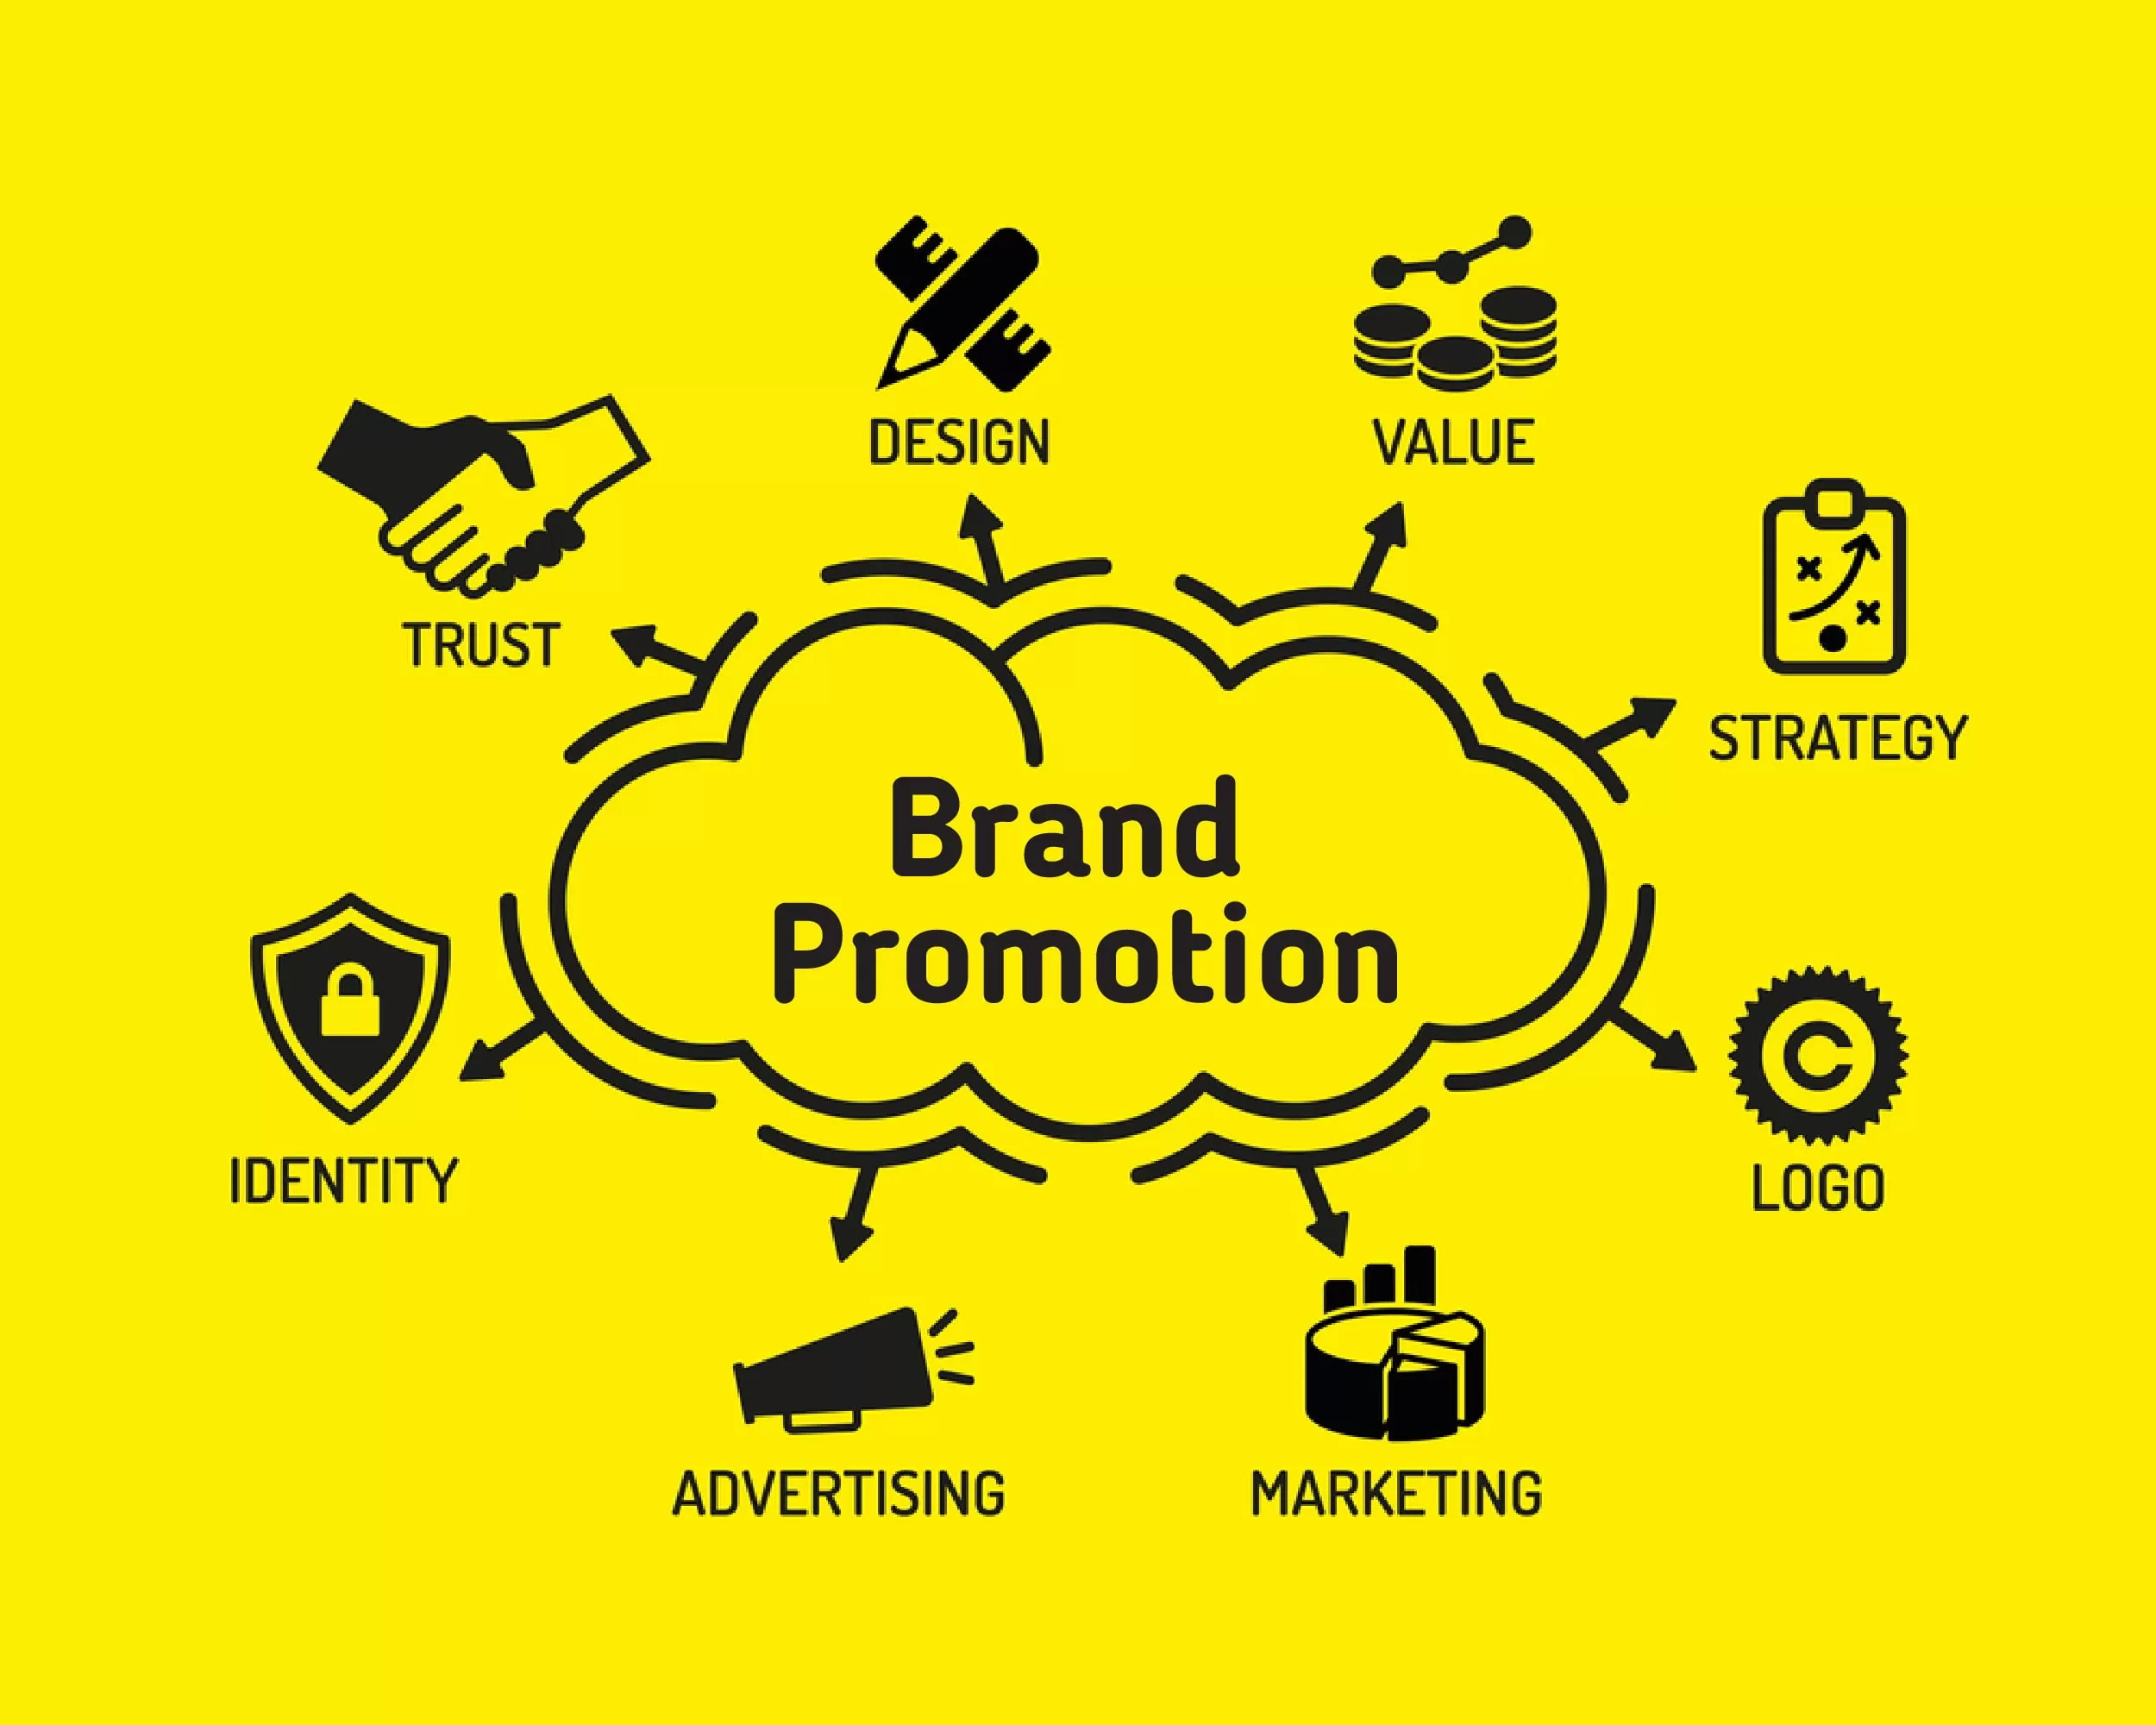 brand promotion companies in india, brand promotion companies, brand promotion, brand consulting firms in india, brandezza, brand consulting agency, brand consulting firms